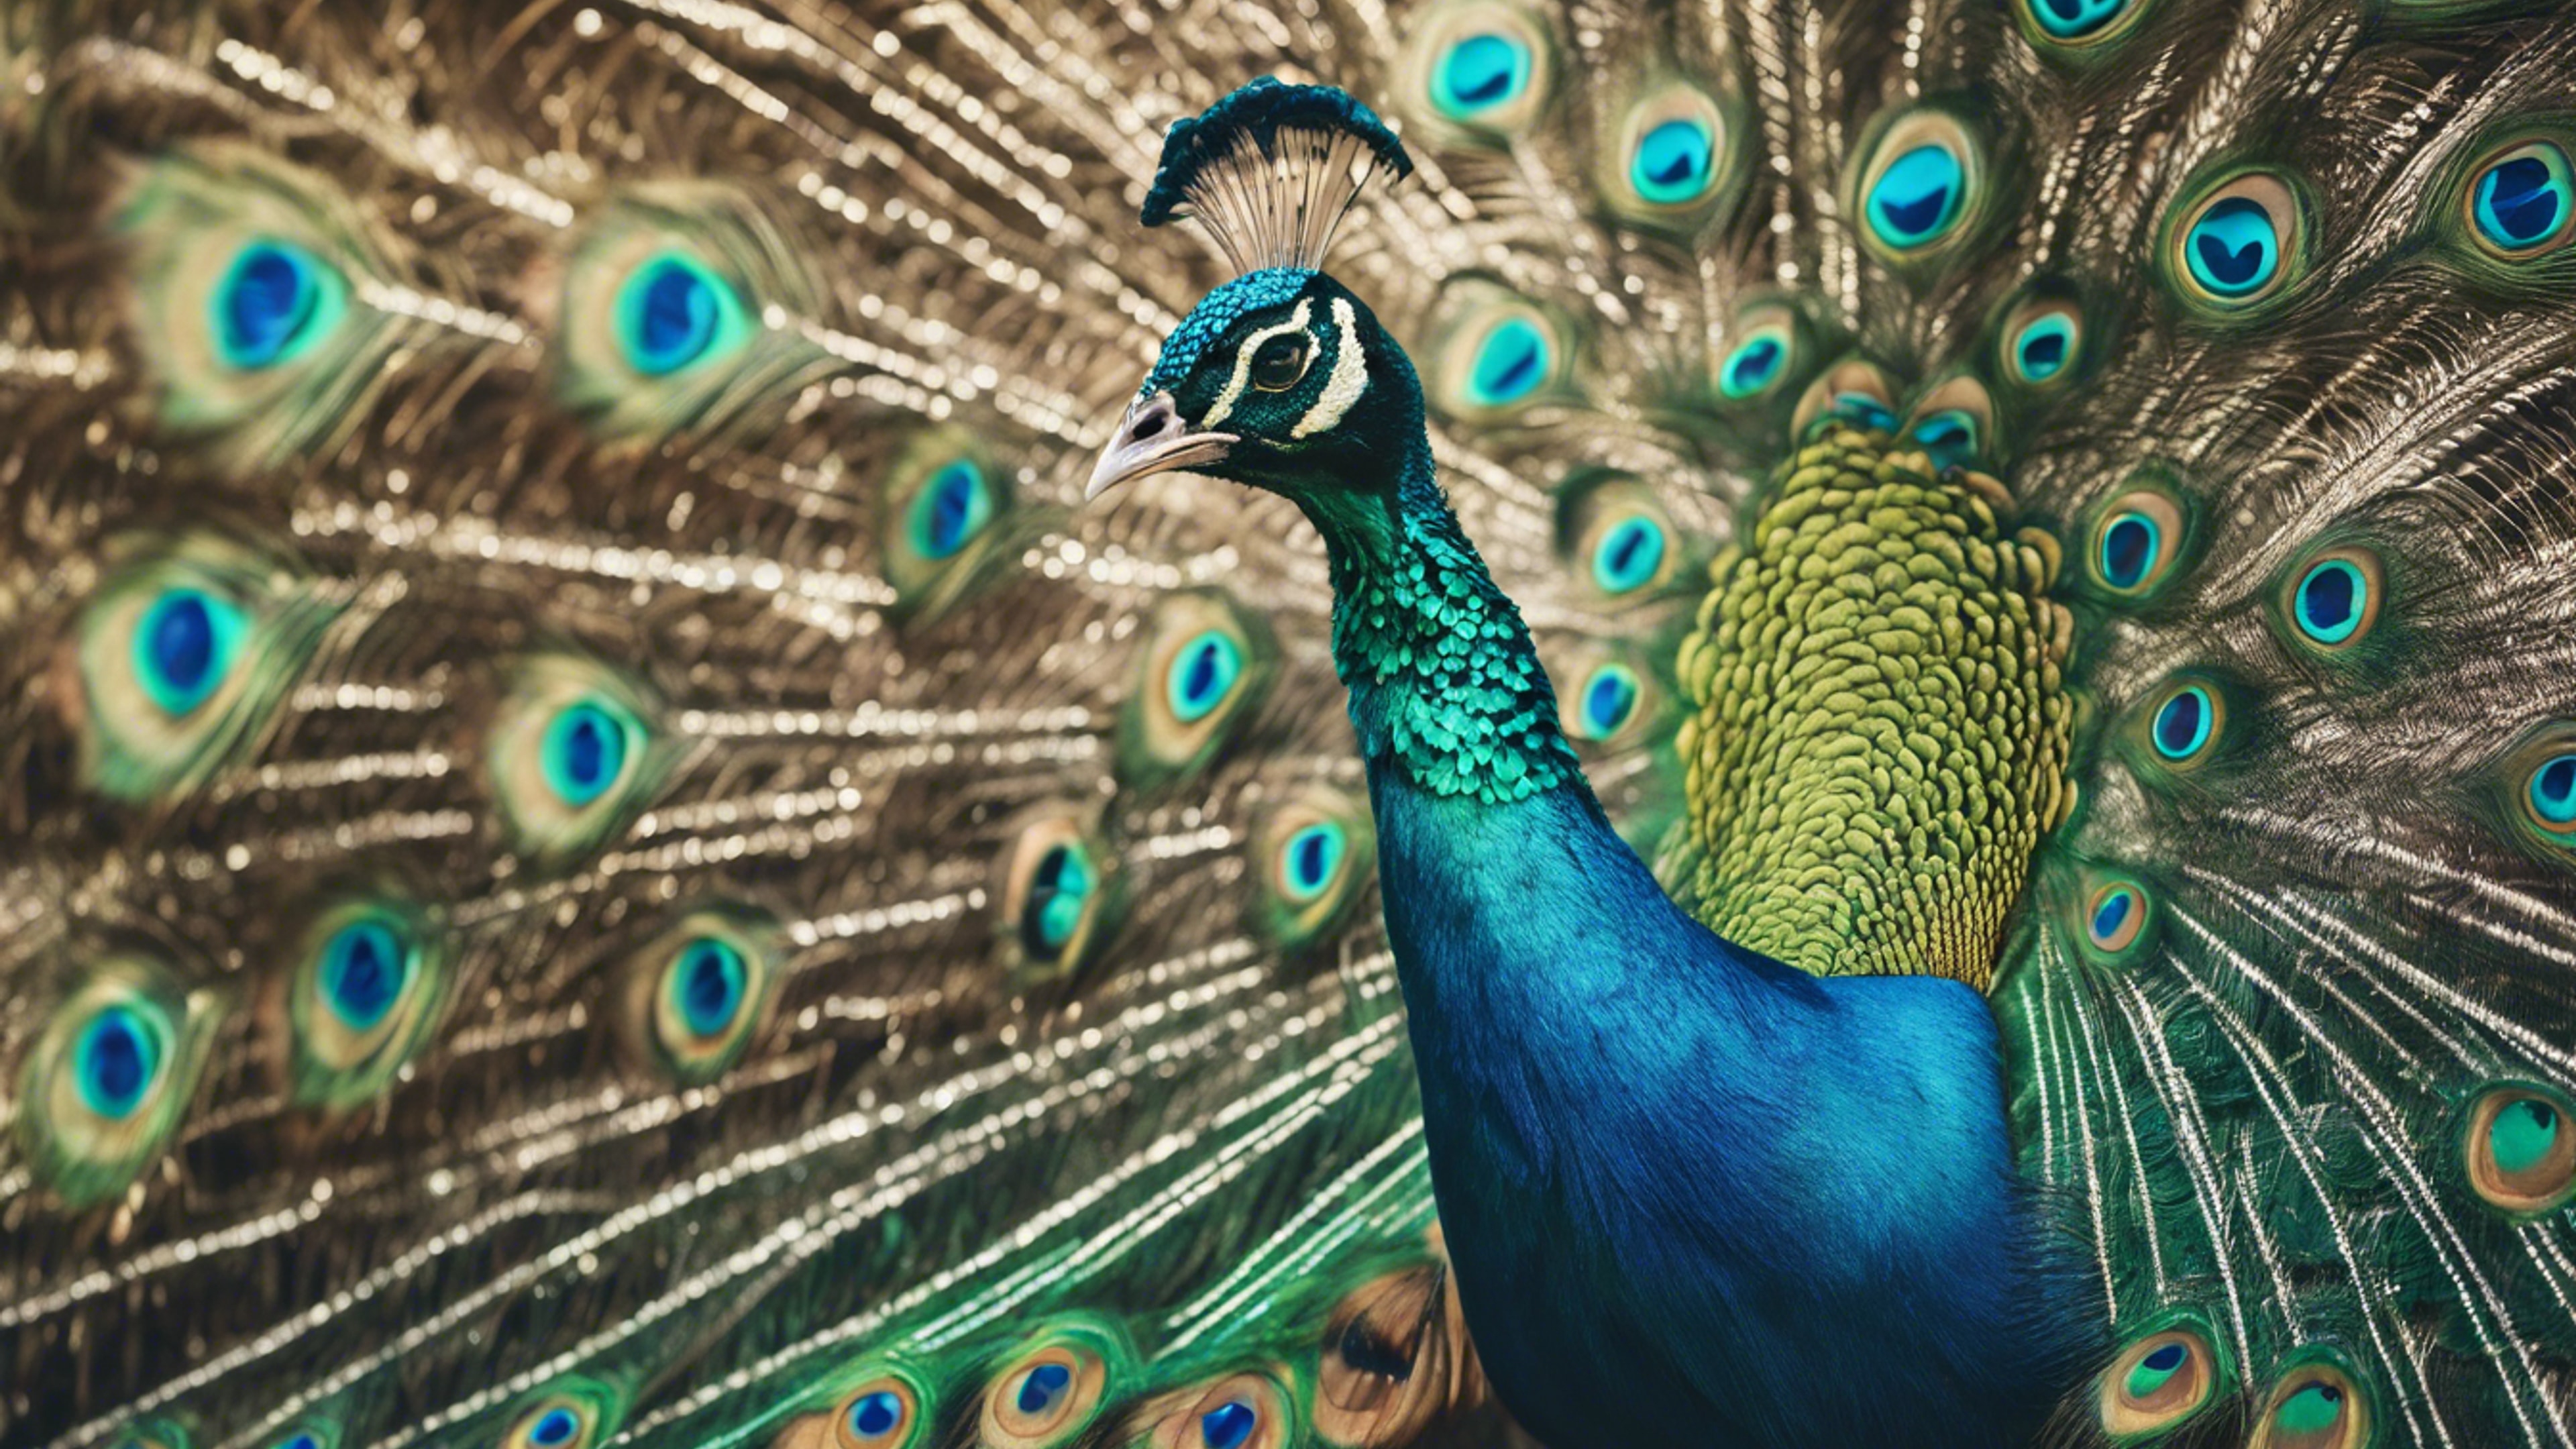 A proudly standing peacock showing off its cool teal plumage. วอลล์เปเปอร์[c03cd8acf17648f0a47e]